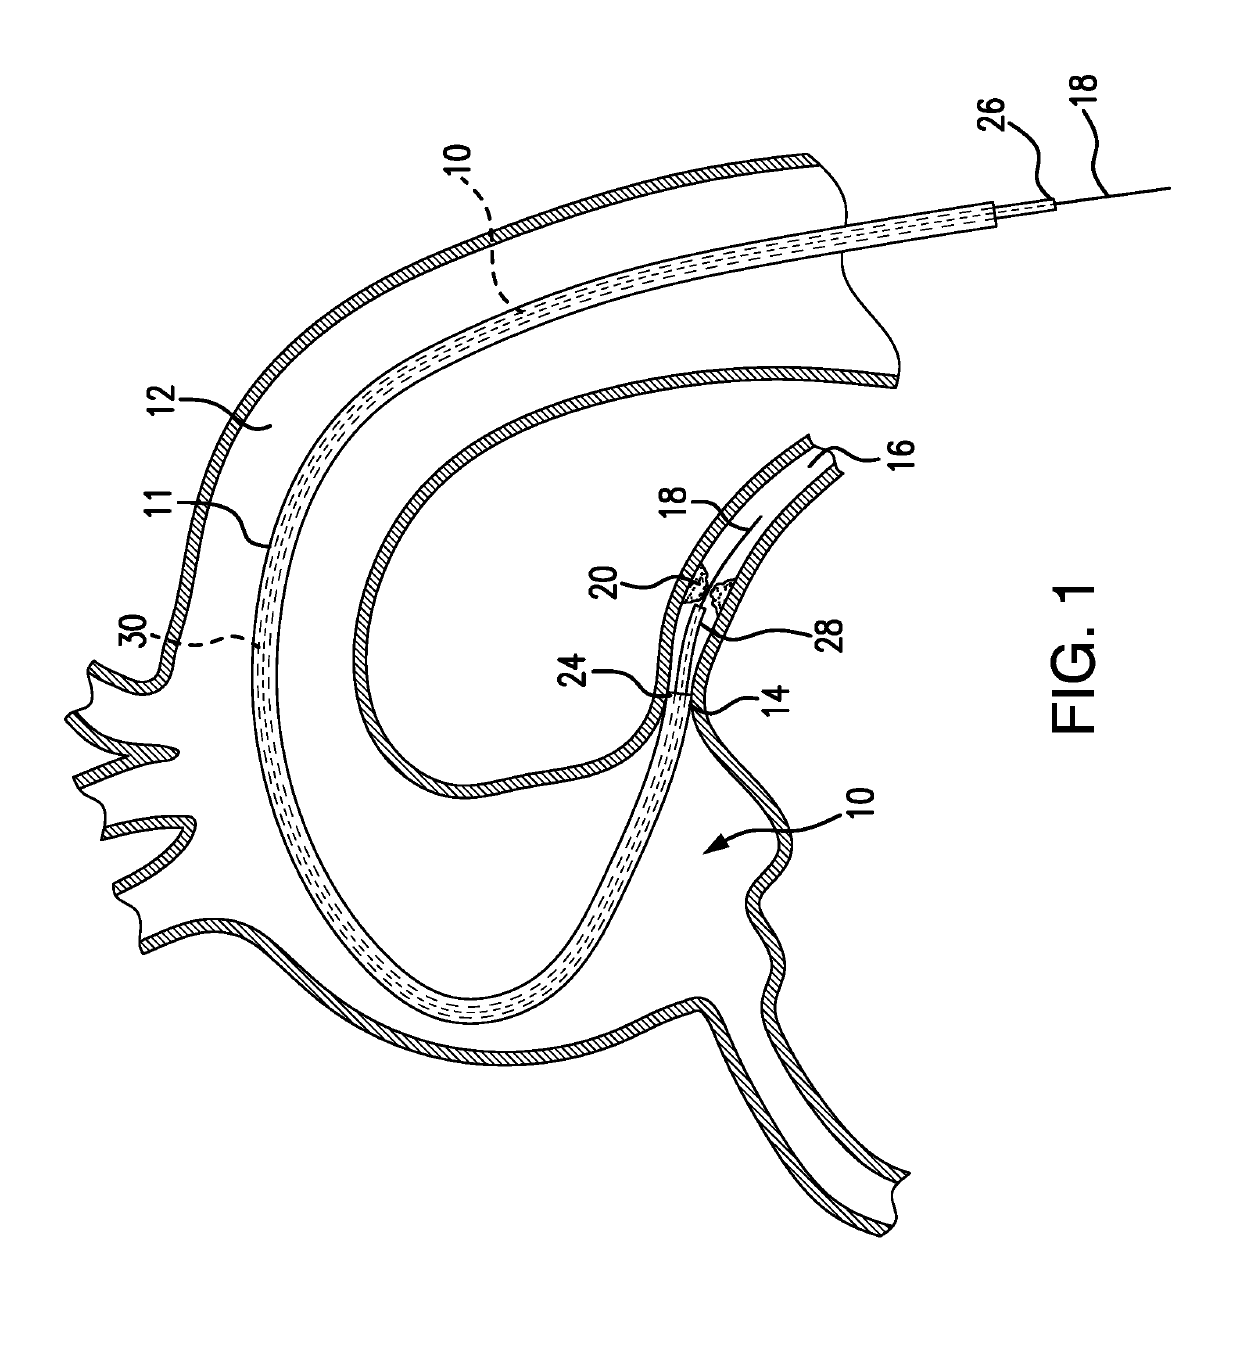 Guide catheter extension system with a delivery micro-catheter configured to facilitate percutaneous coronary intervention